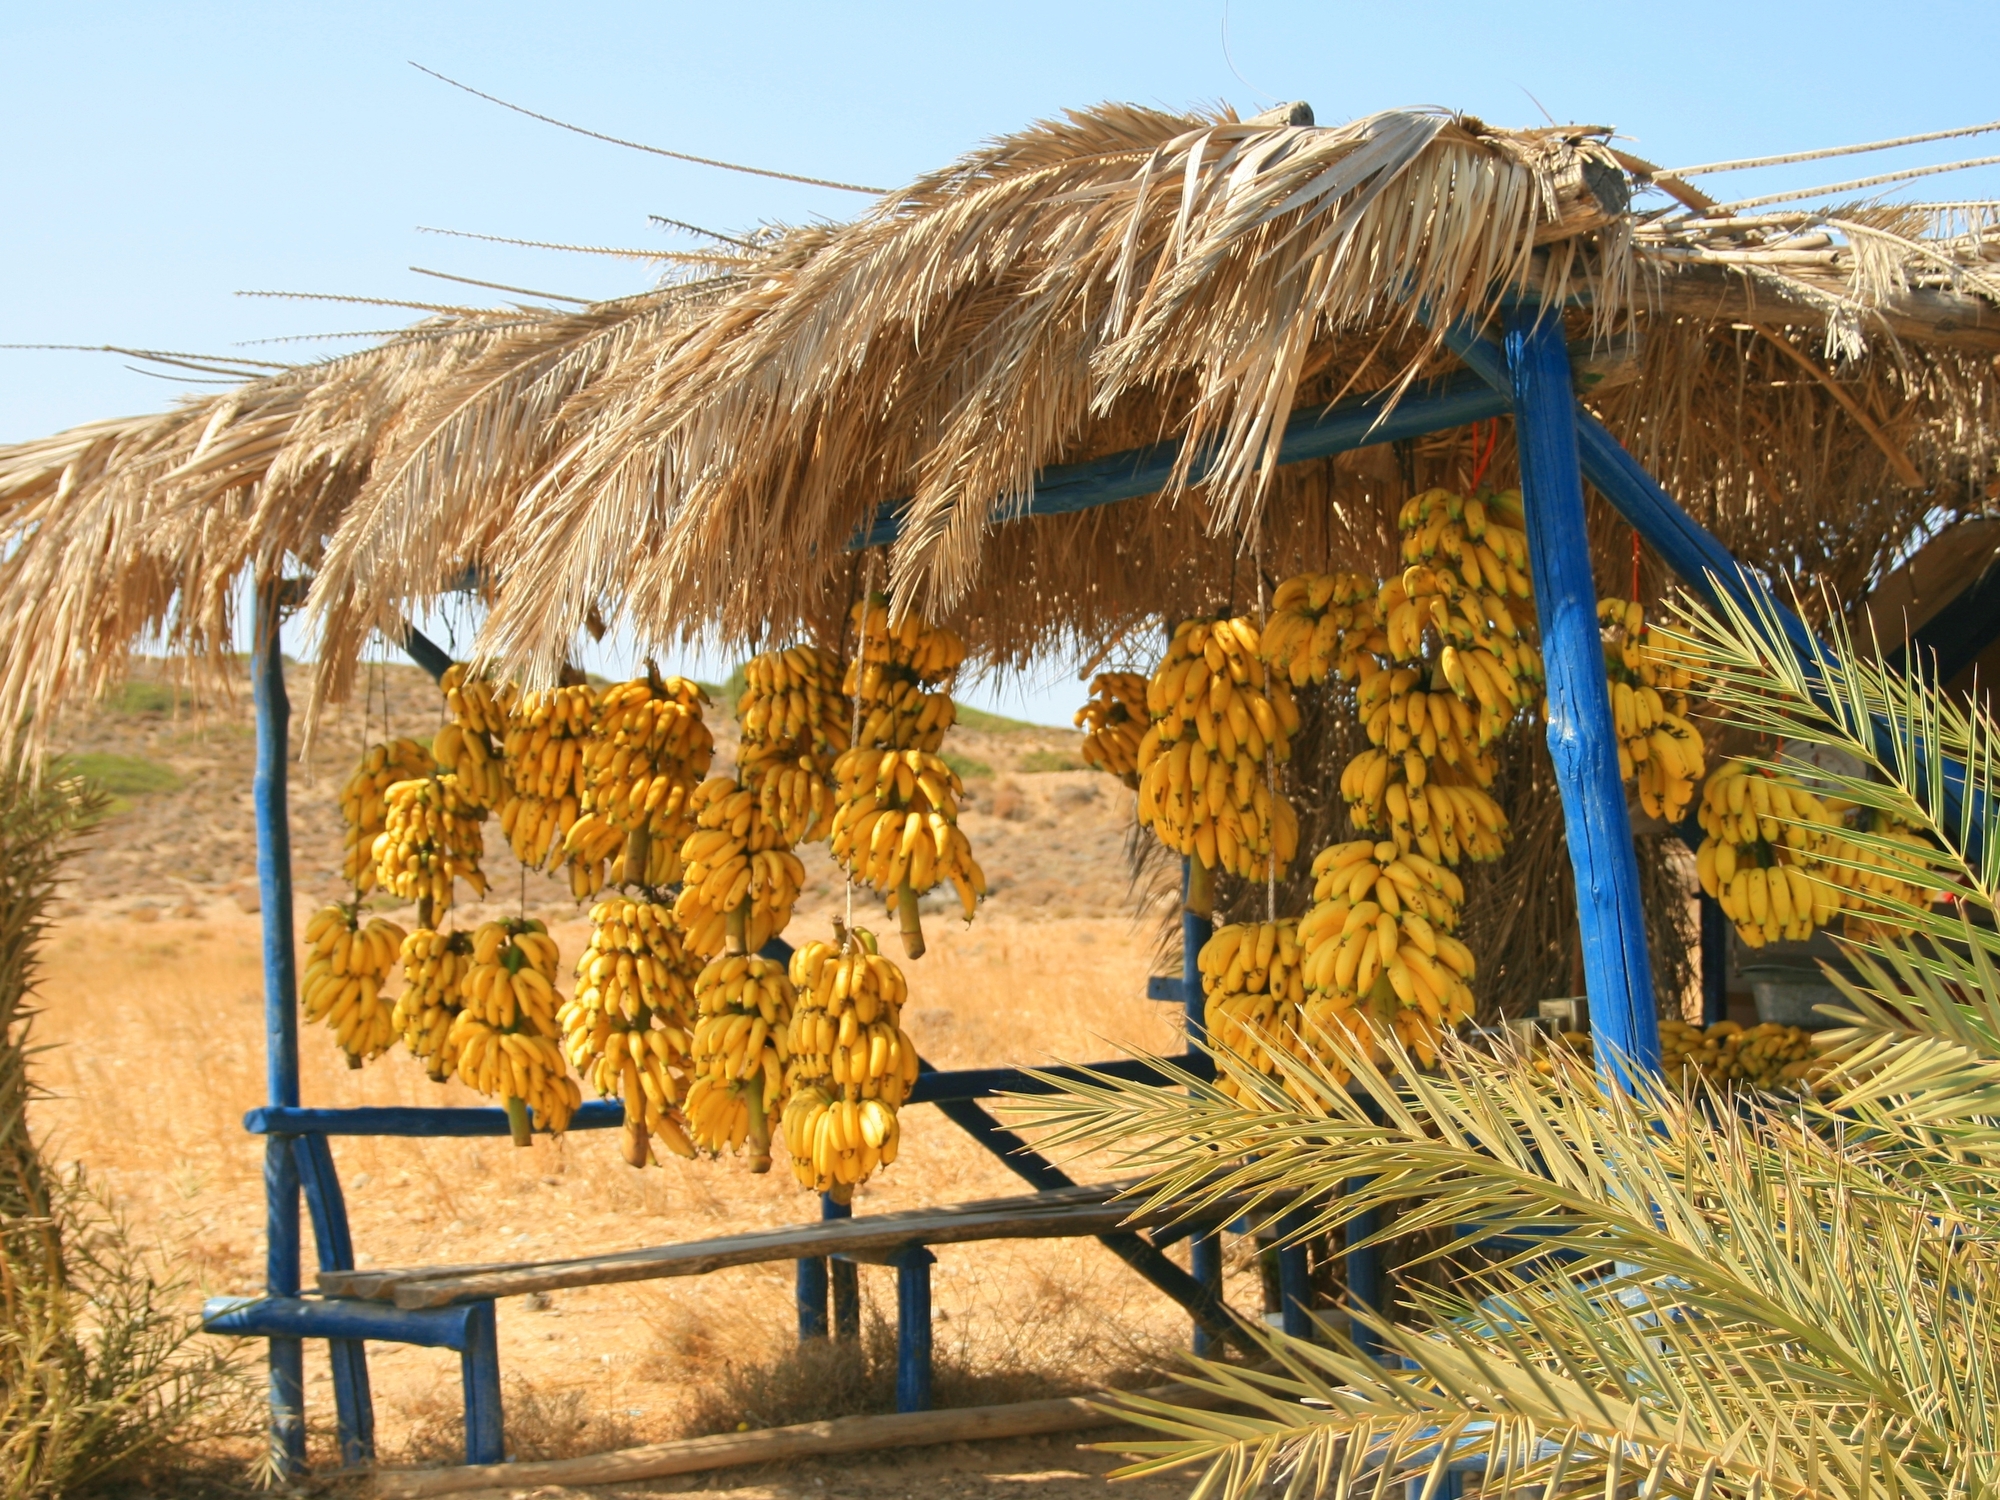 A photo of a tropical banana stand